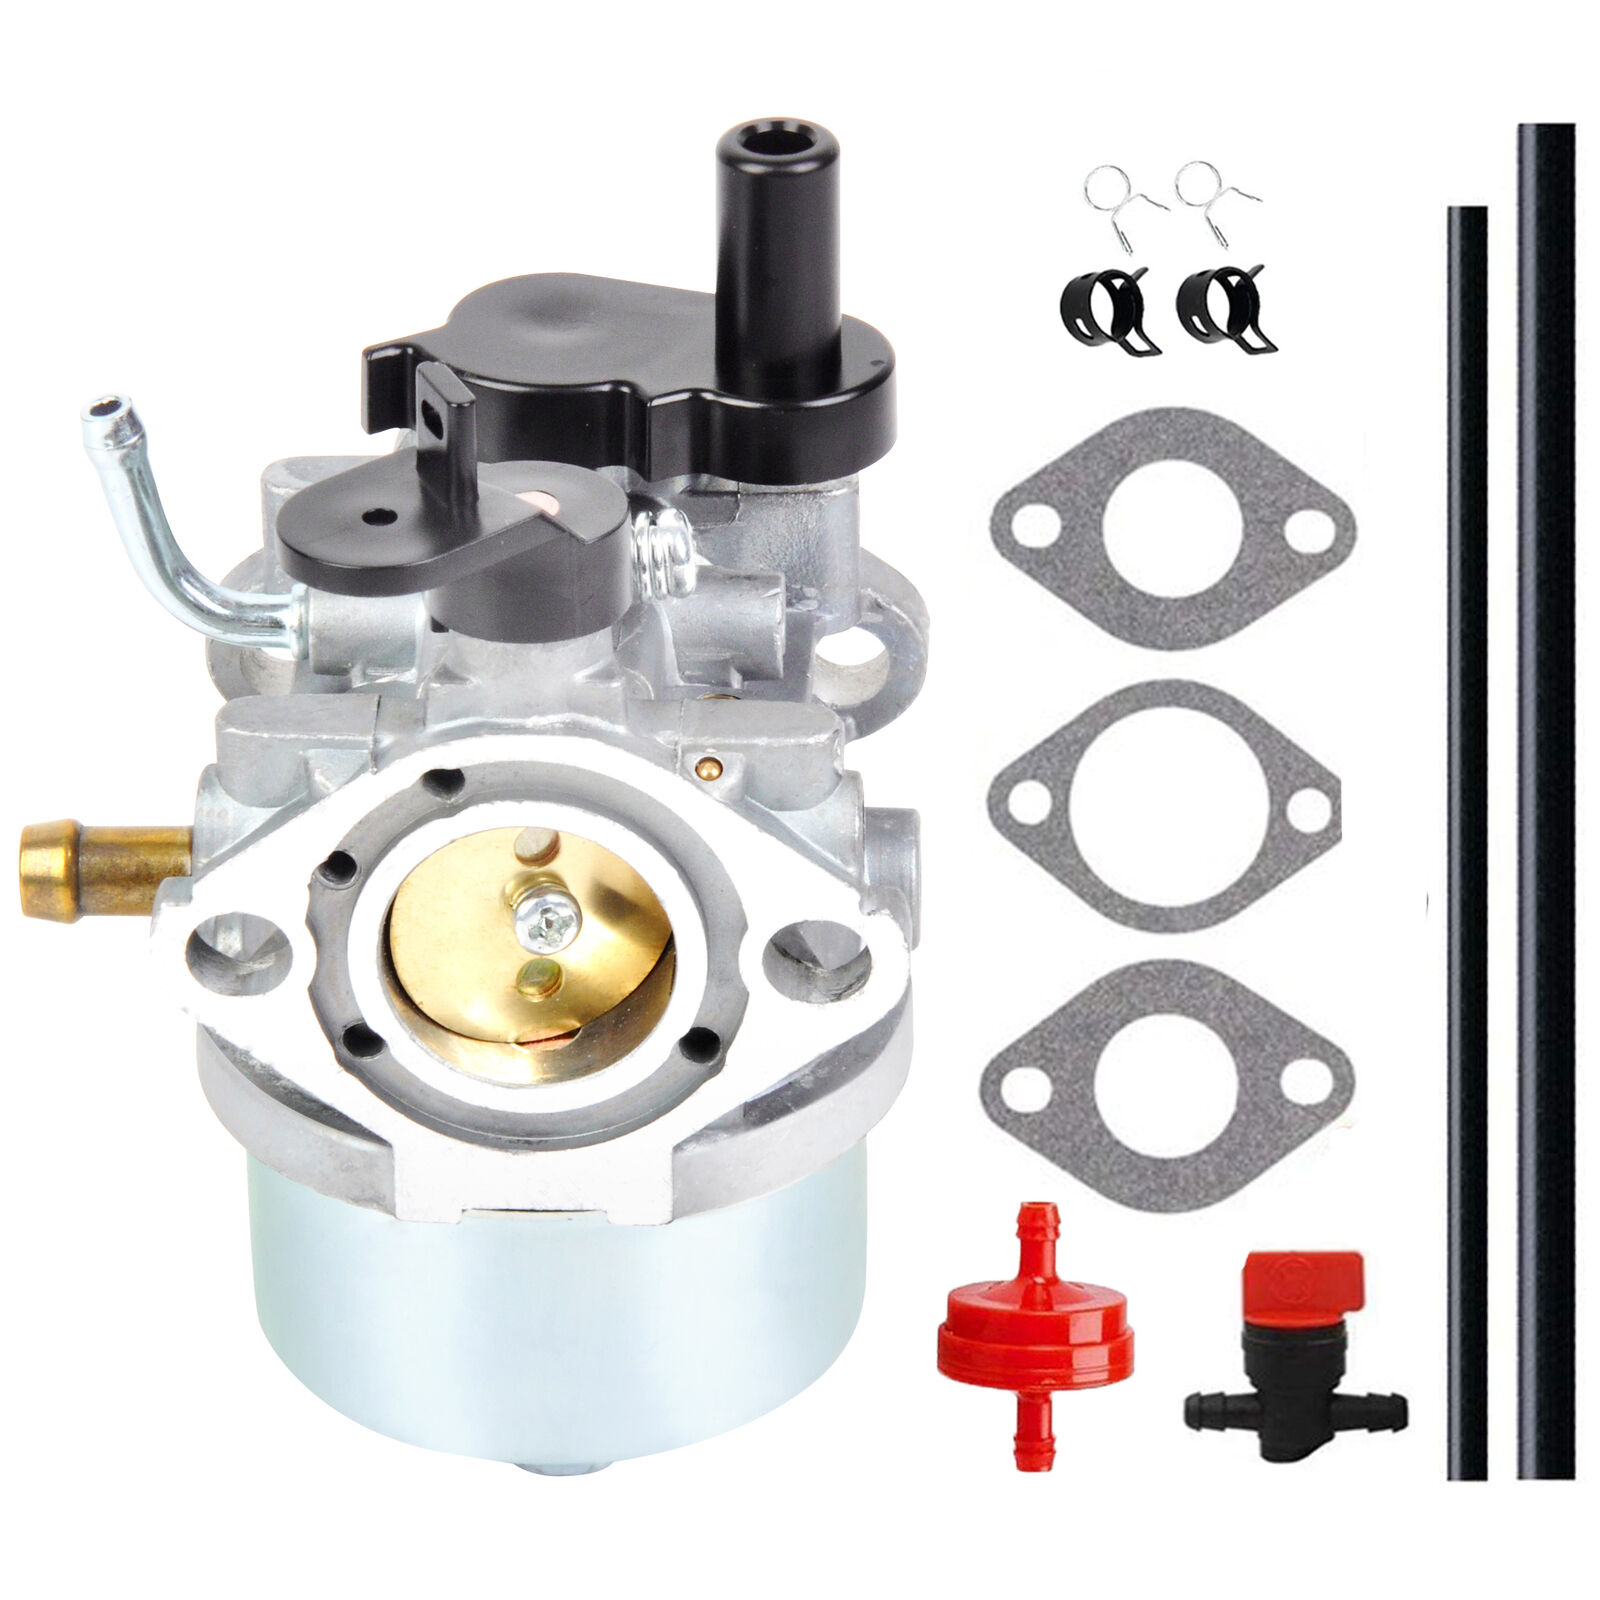 Carburetor Challenge the lowest price of Japan ☆ For Toro 38583 Power Clear™ 21